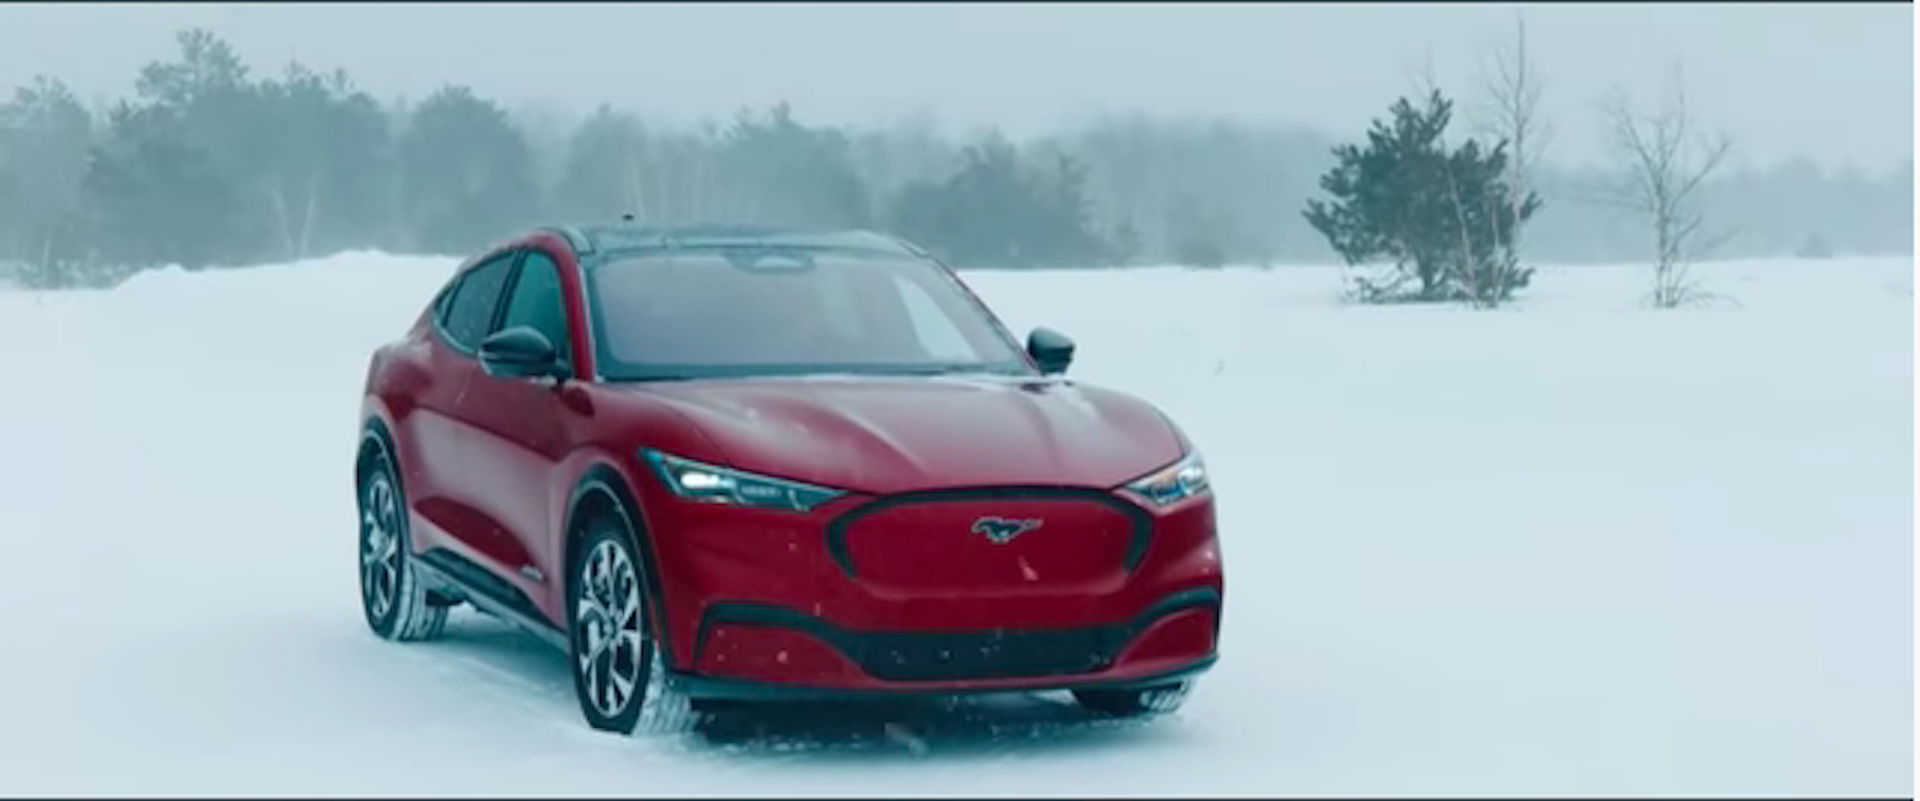 Image from Ford video of Mach-E in snowy conditions